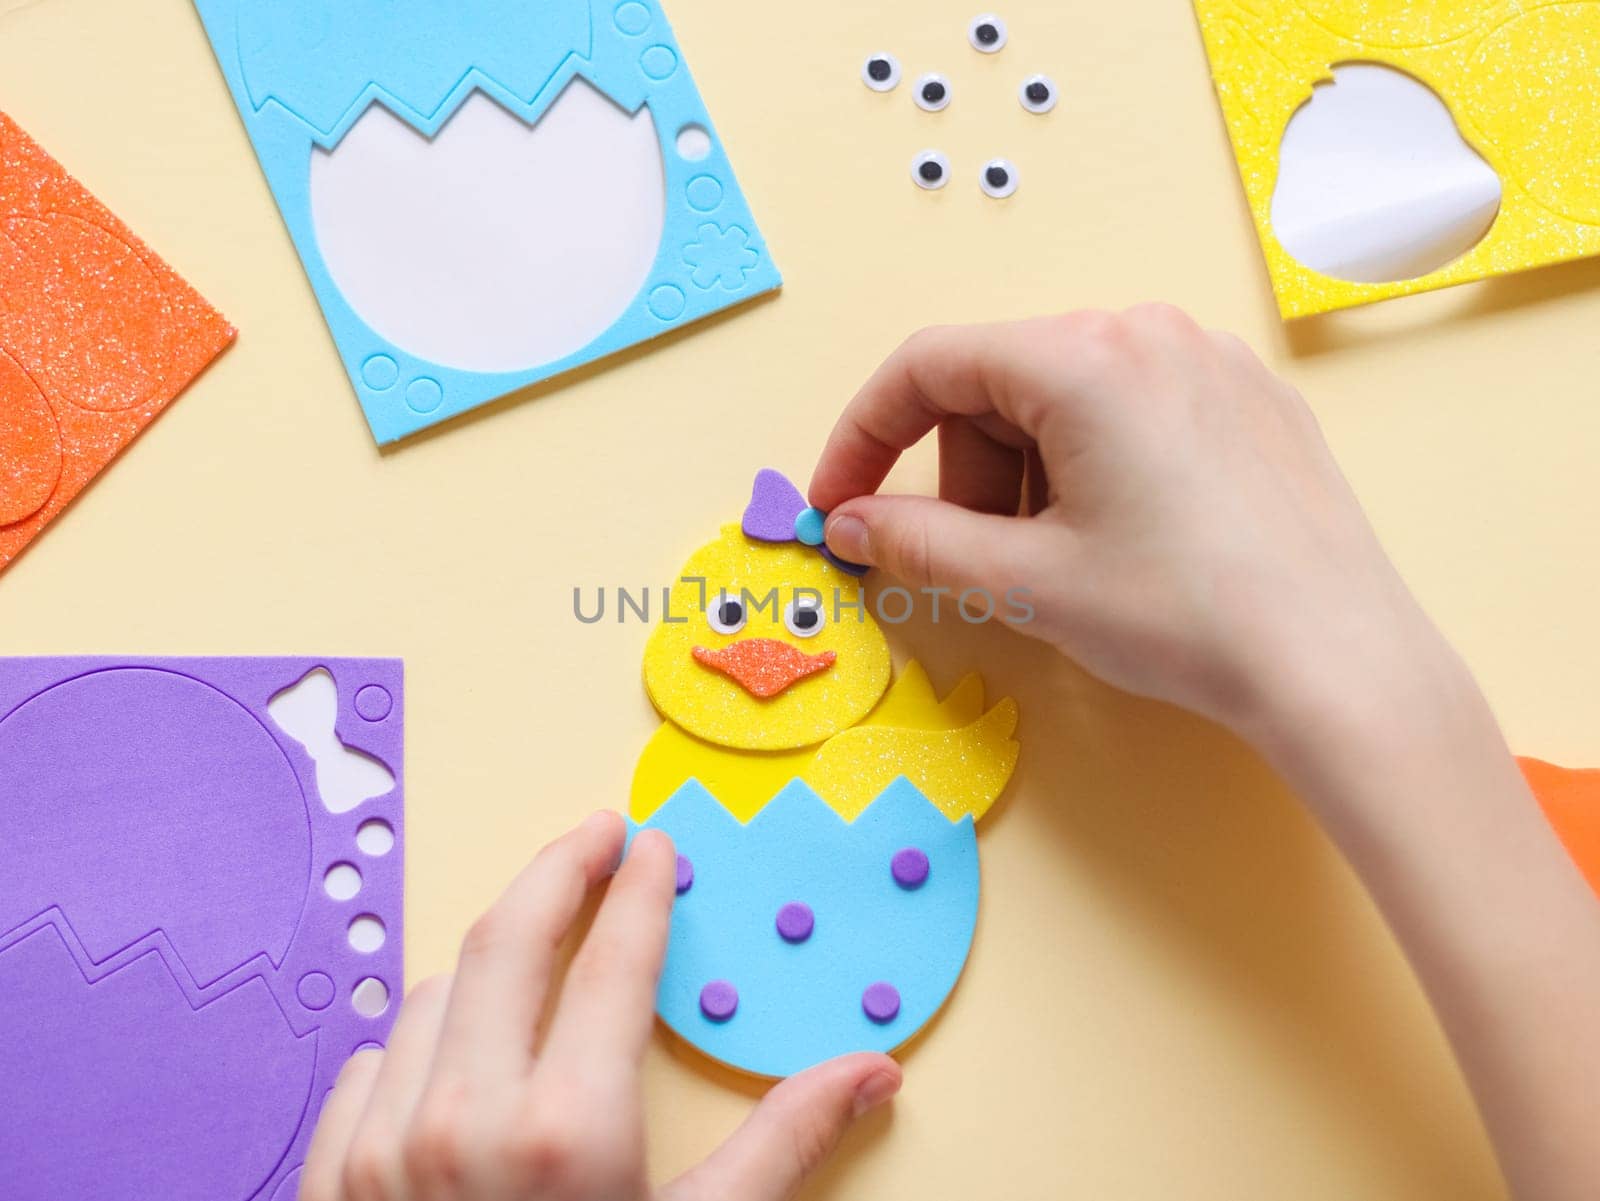 The hands of a caucasian teenage girl stick a lilac bow sticker on a yellow chicken felt with her fingers, sitting at a children's table with a set of handmade items on a pale yellow background with selective focus, flat lay closeup. The concept of crafts, diy, needlework, diy, children art, artisanal, Easter preparation,children creative.